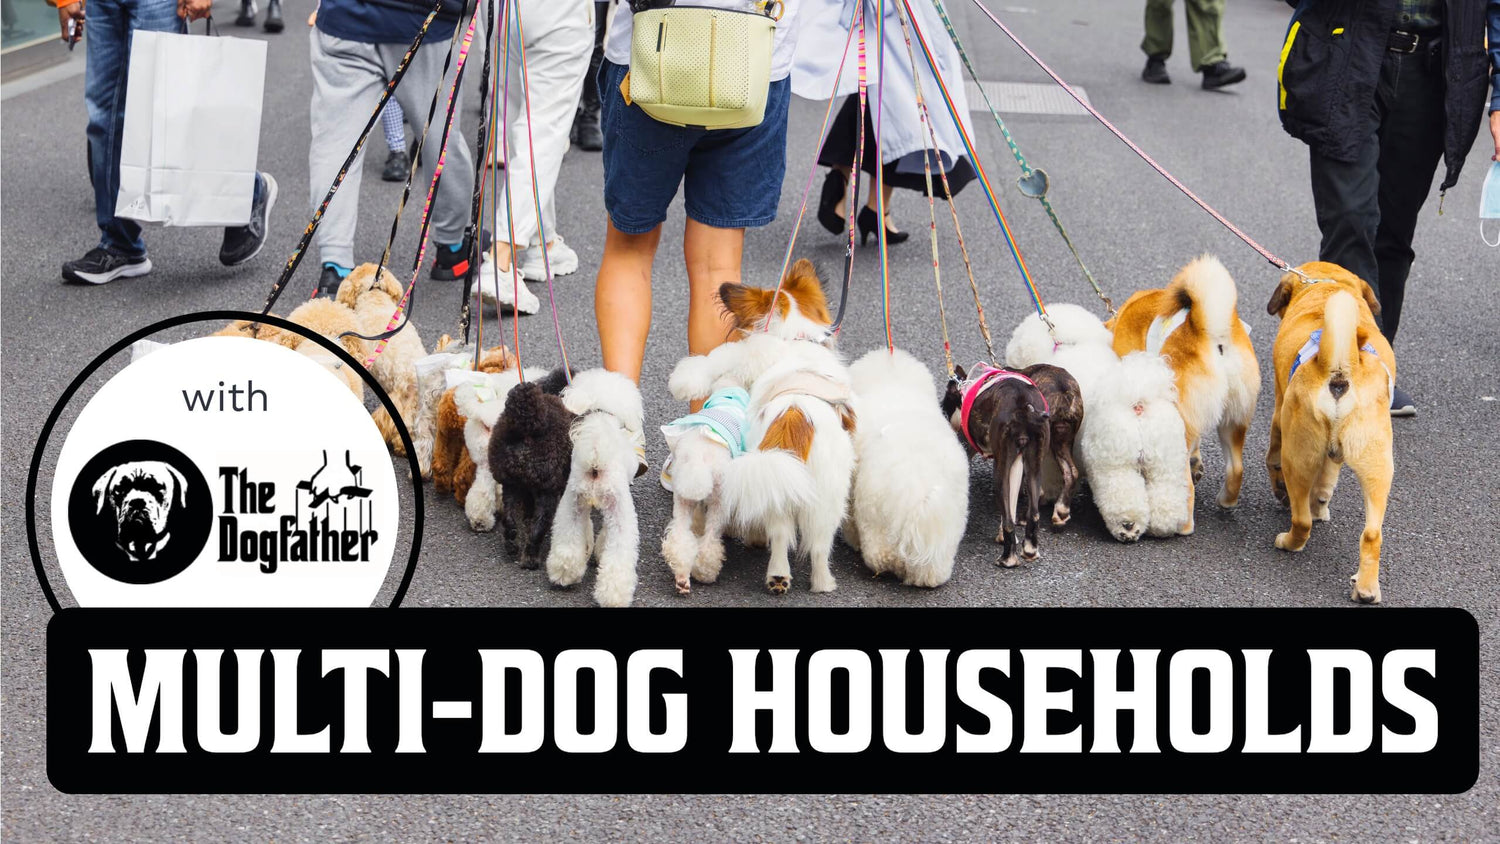 A person walking multiple dogs on leashes holding them in both hands and a box with text “Multi-Dog Households”